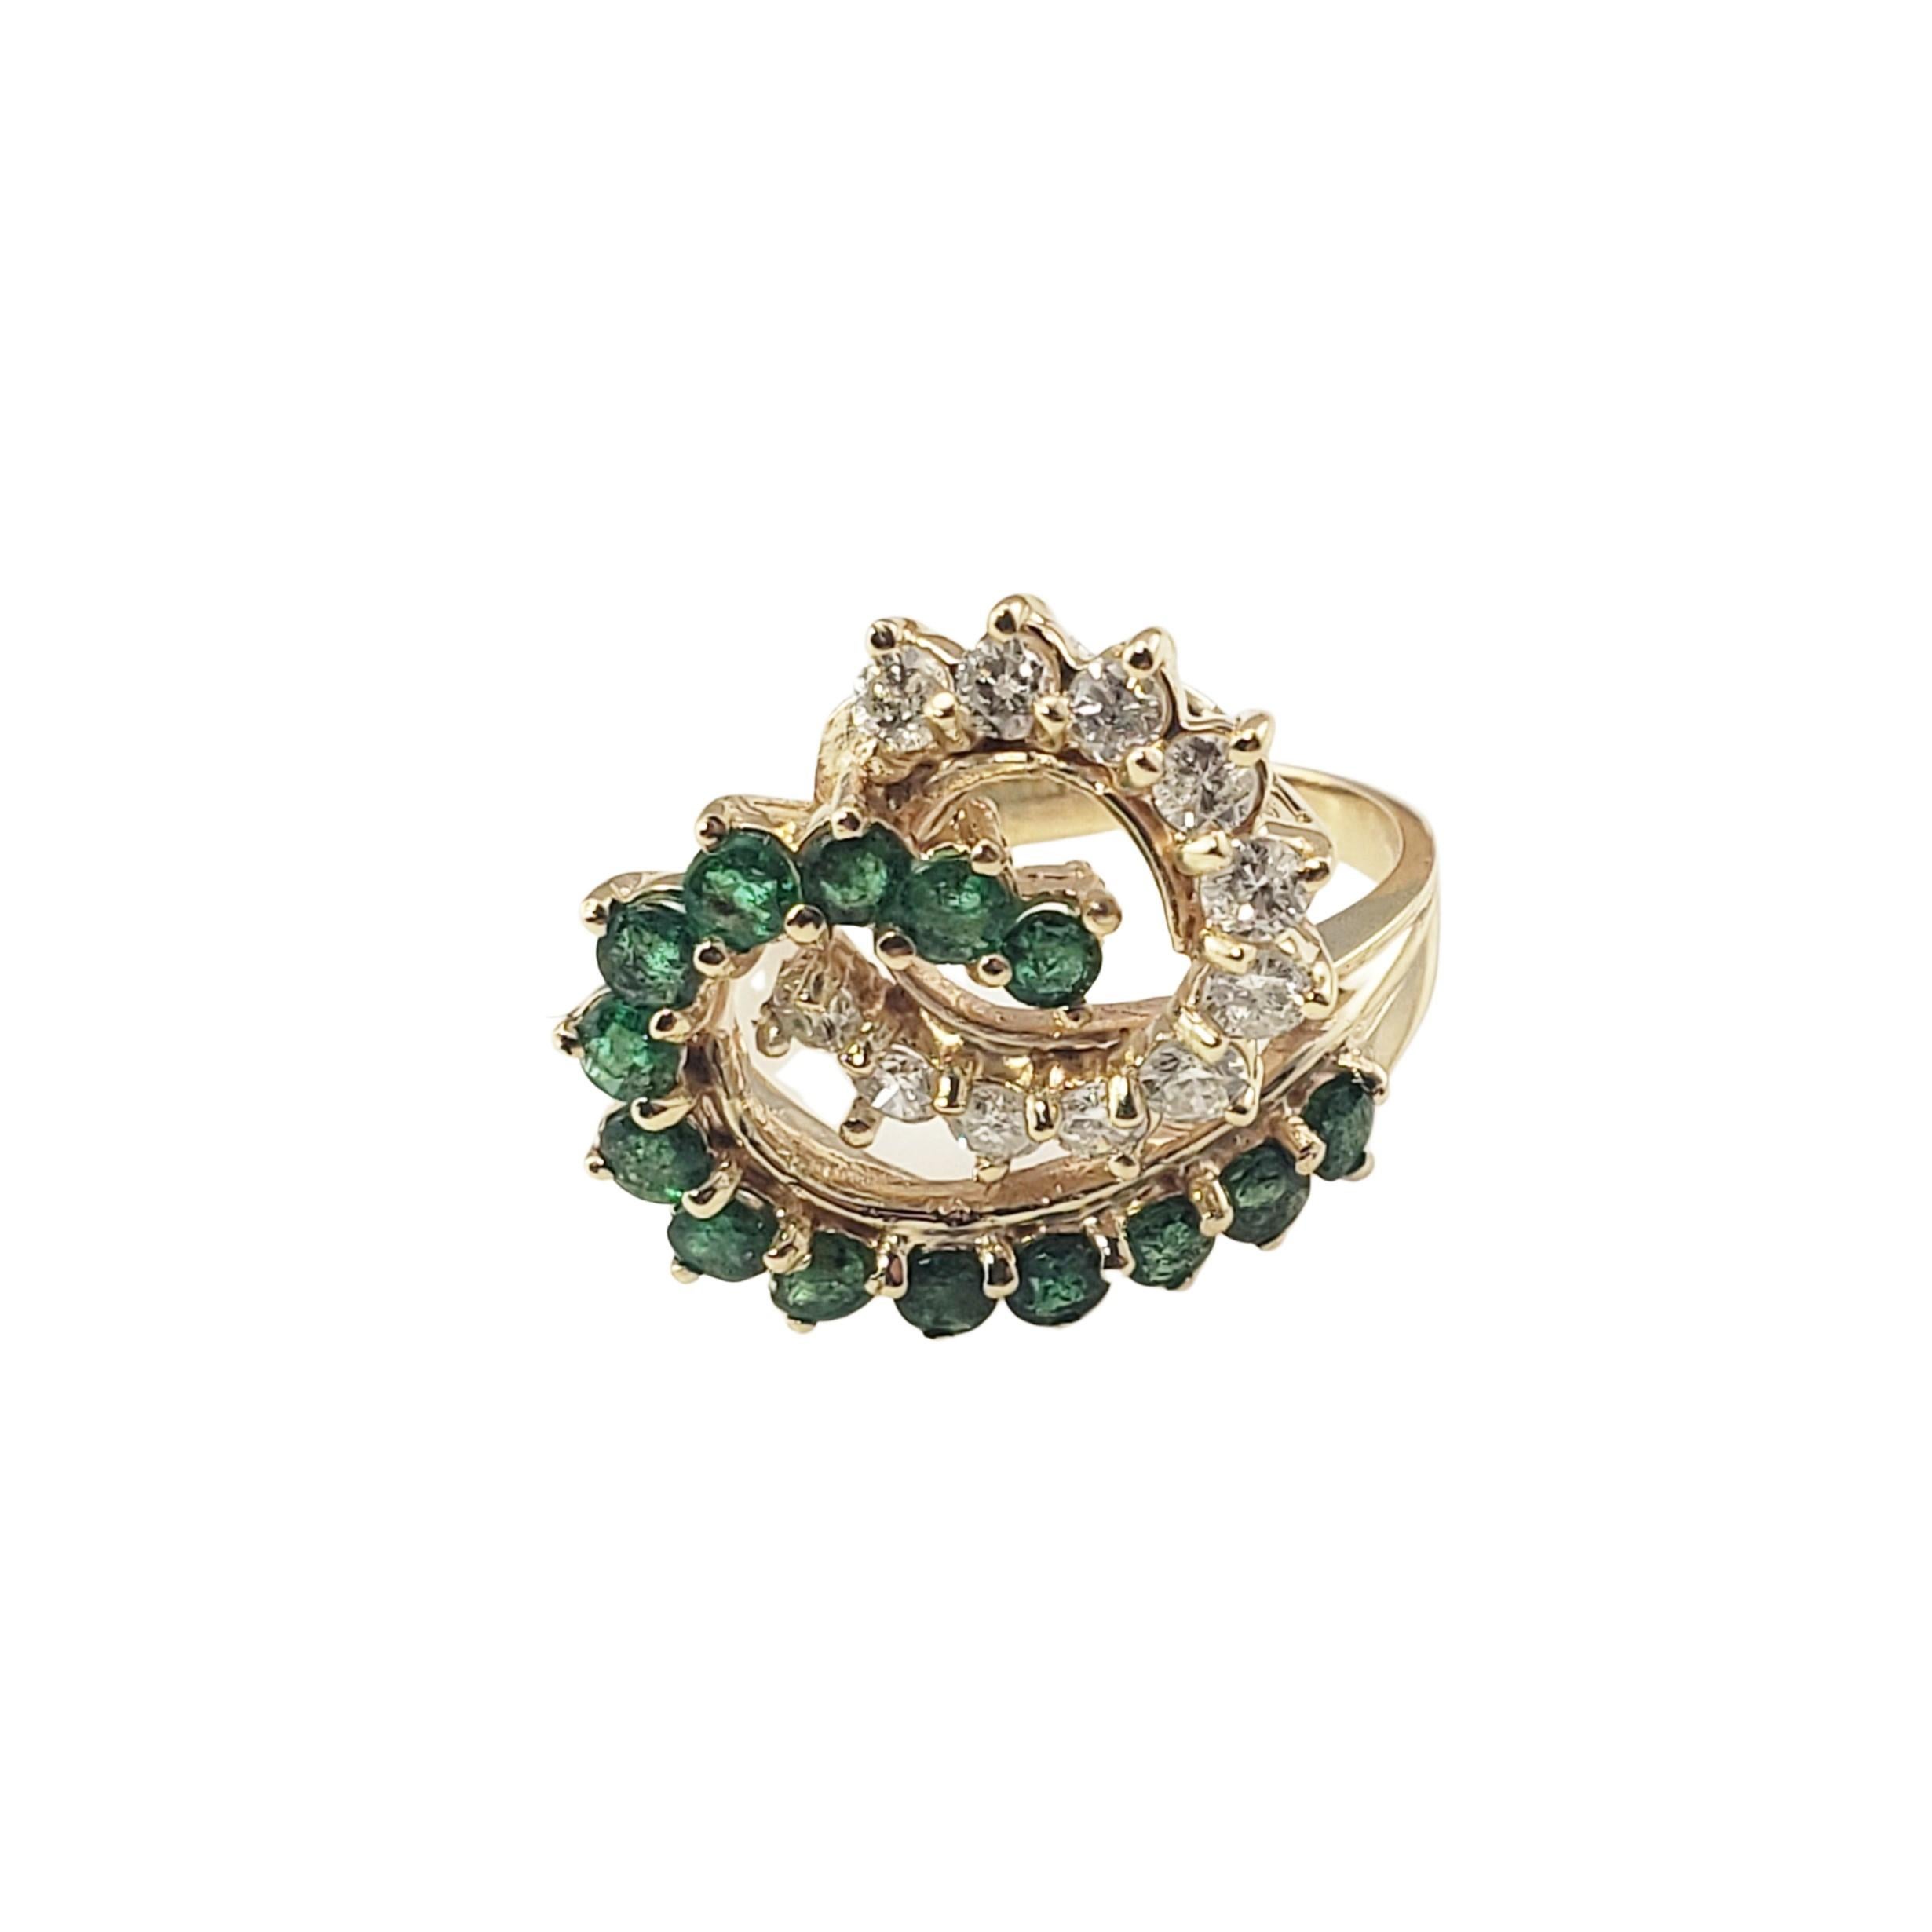 Vintage 14 Karat Yellow Gold Natural Emerald and Diamond Ring Size 6.25-

This stunning ring features 14 round natural emeralds and 11 round brilliant cut diamonds set in beautifully detailed 14K yellow gold.  
Width:  18 mm.  Shank:  2